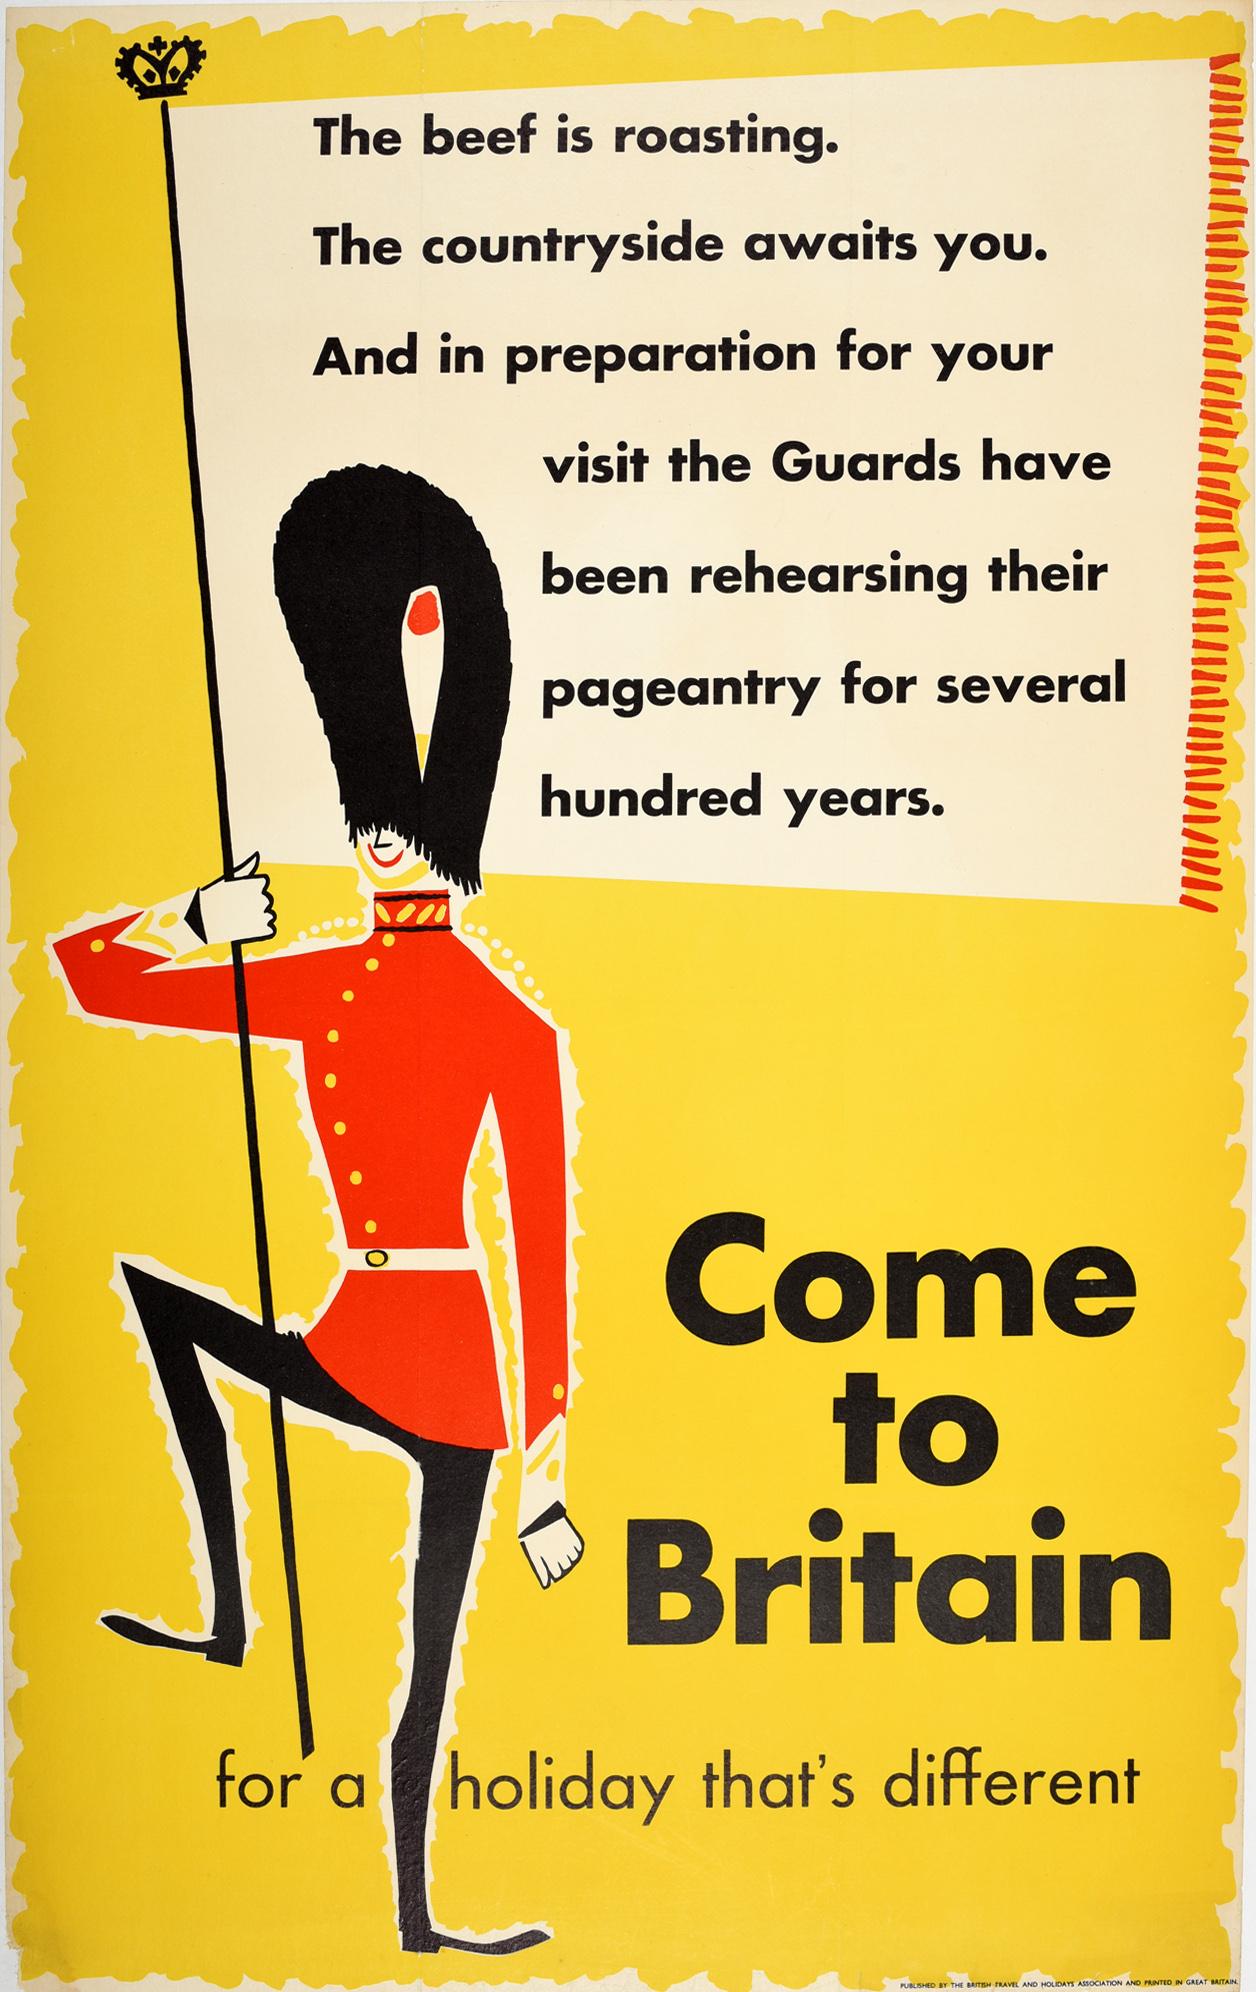 Unknown Print - Original Vintage Travel Poster Come To Britain Ft. Midcentury Royal Guard Design